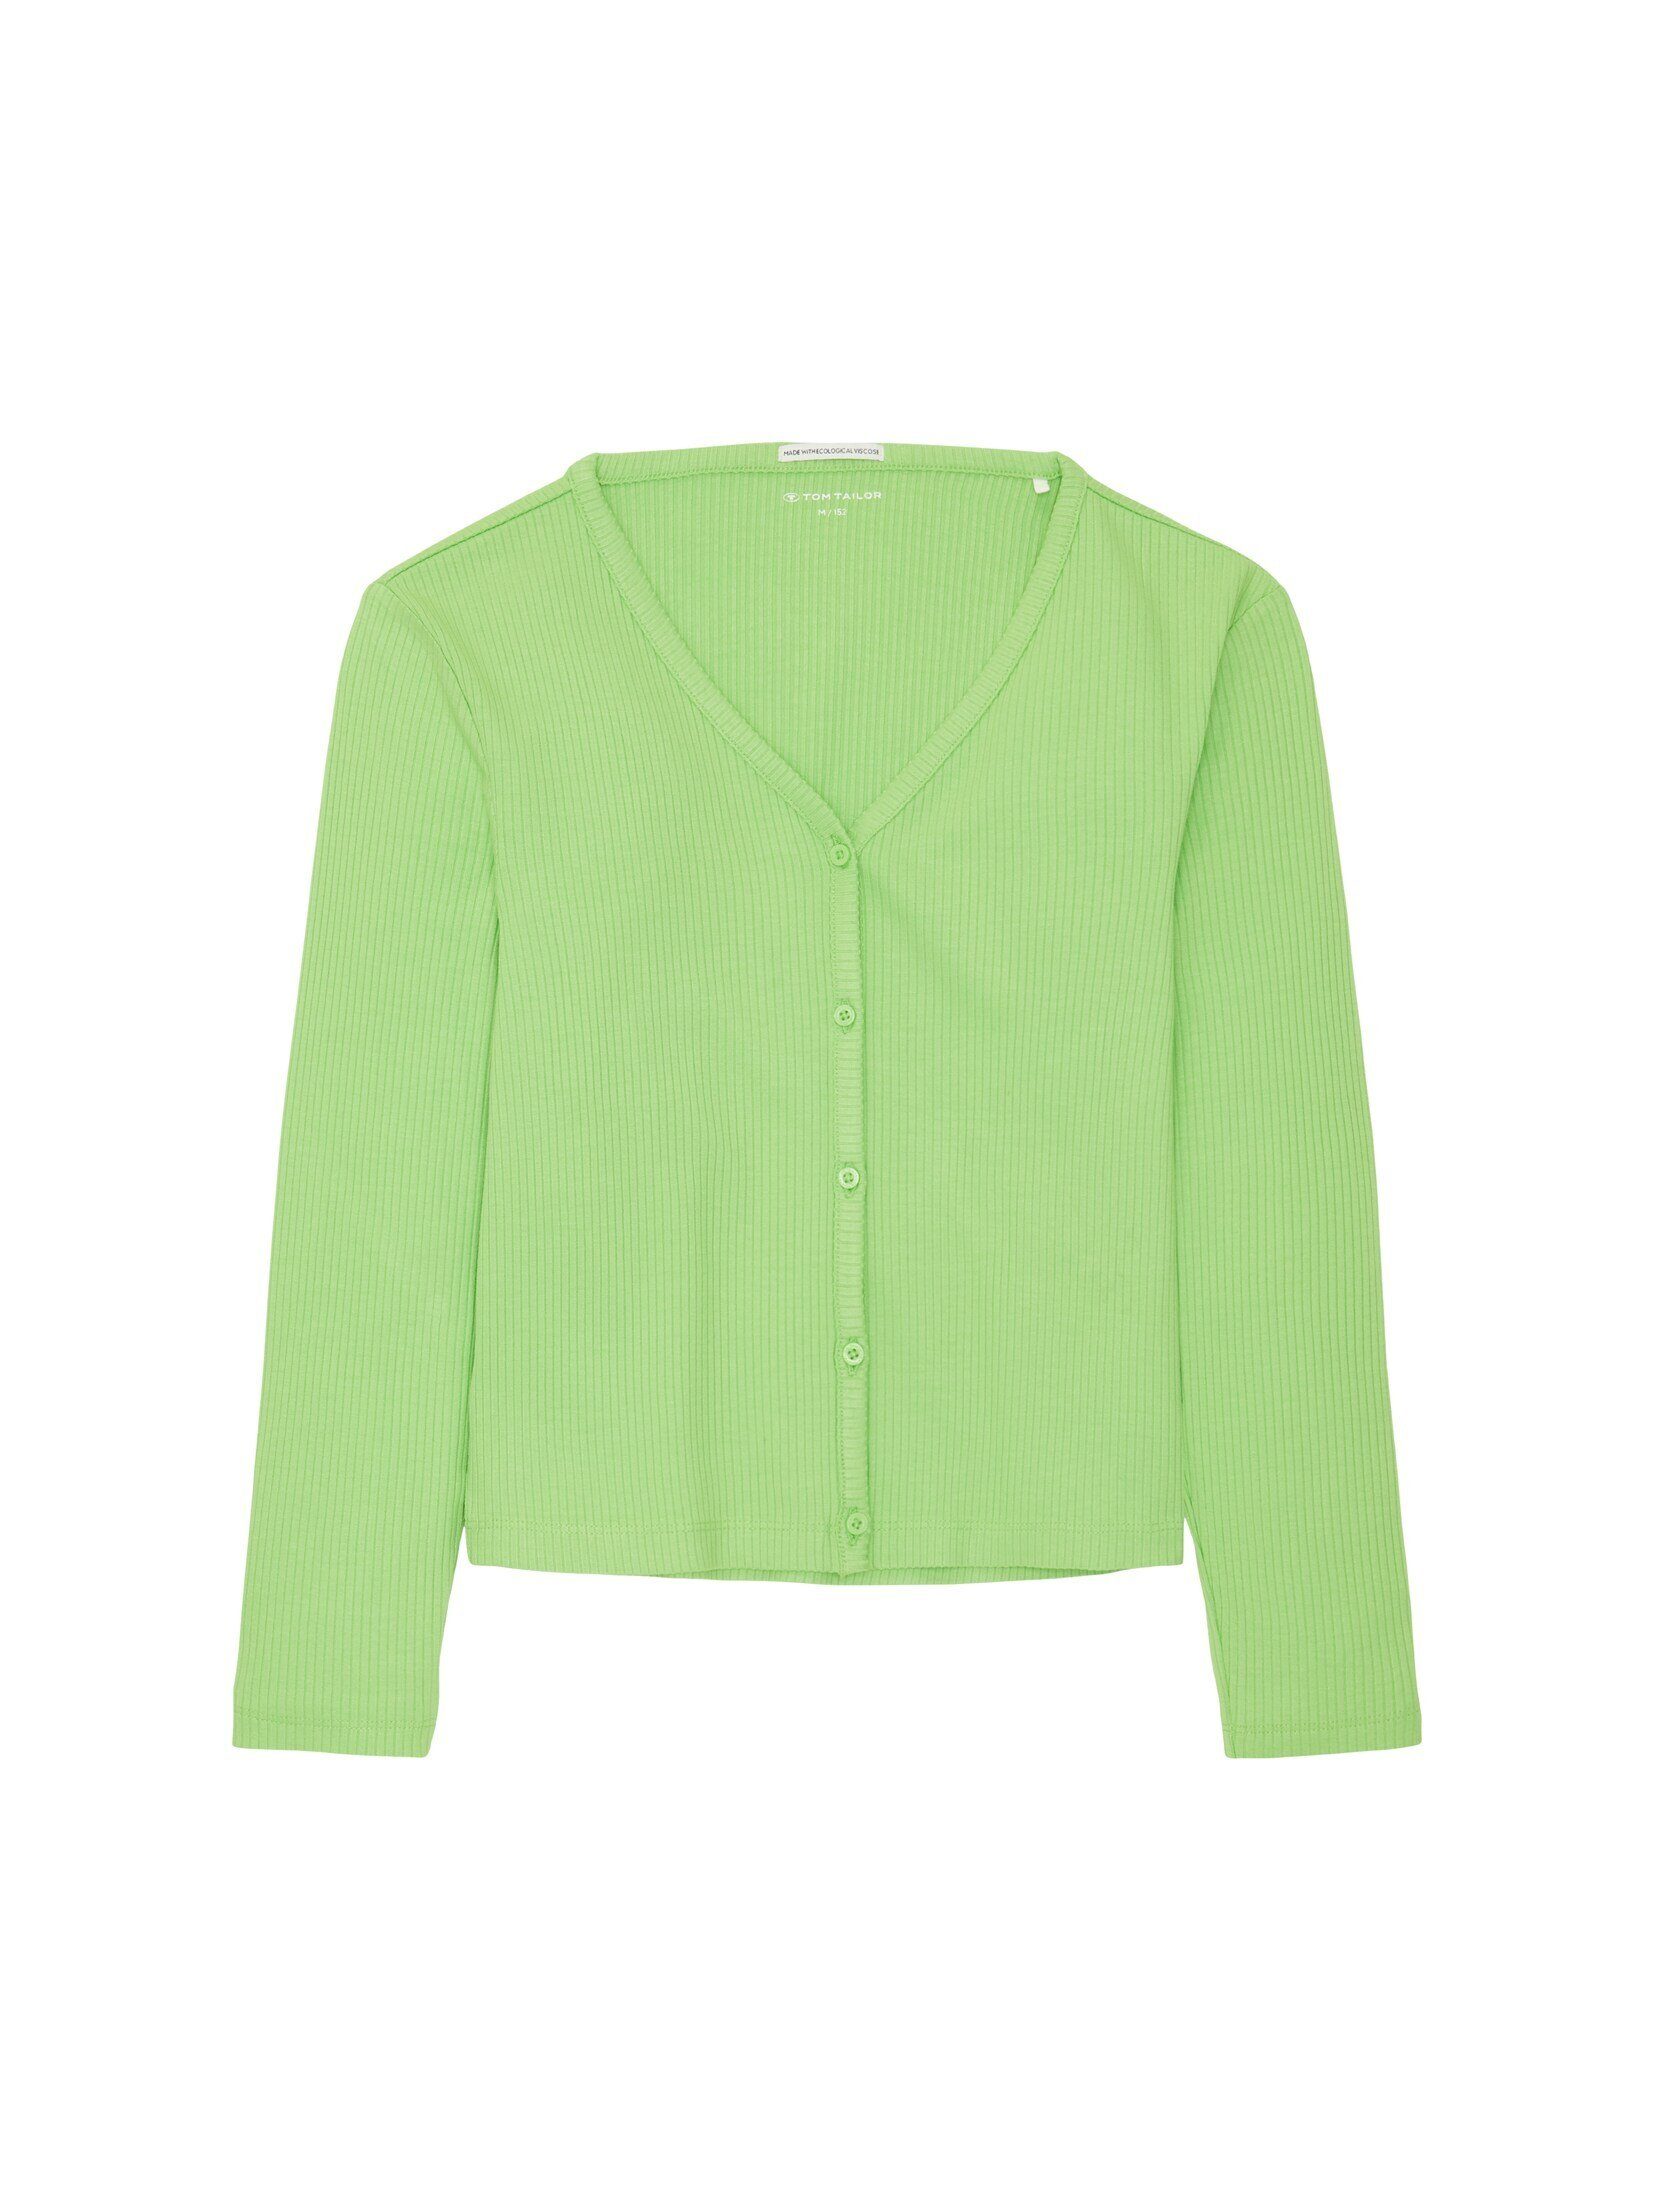 Rippjacke lime Cropped liquid TAILOR T-Shirt green TOM